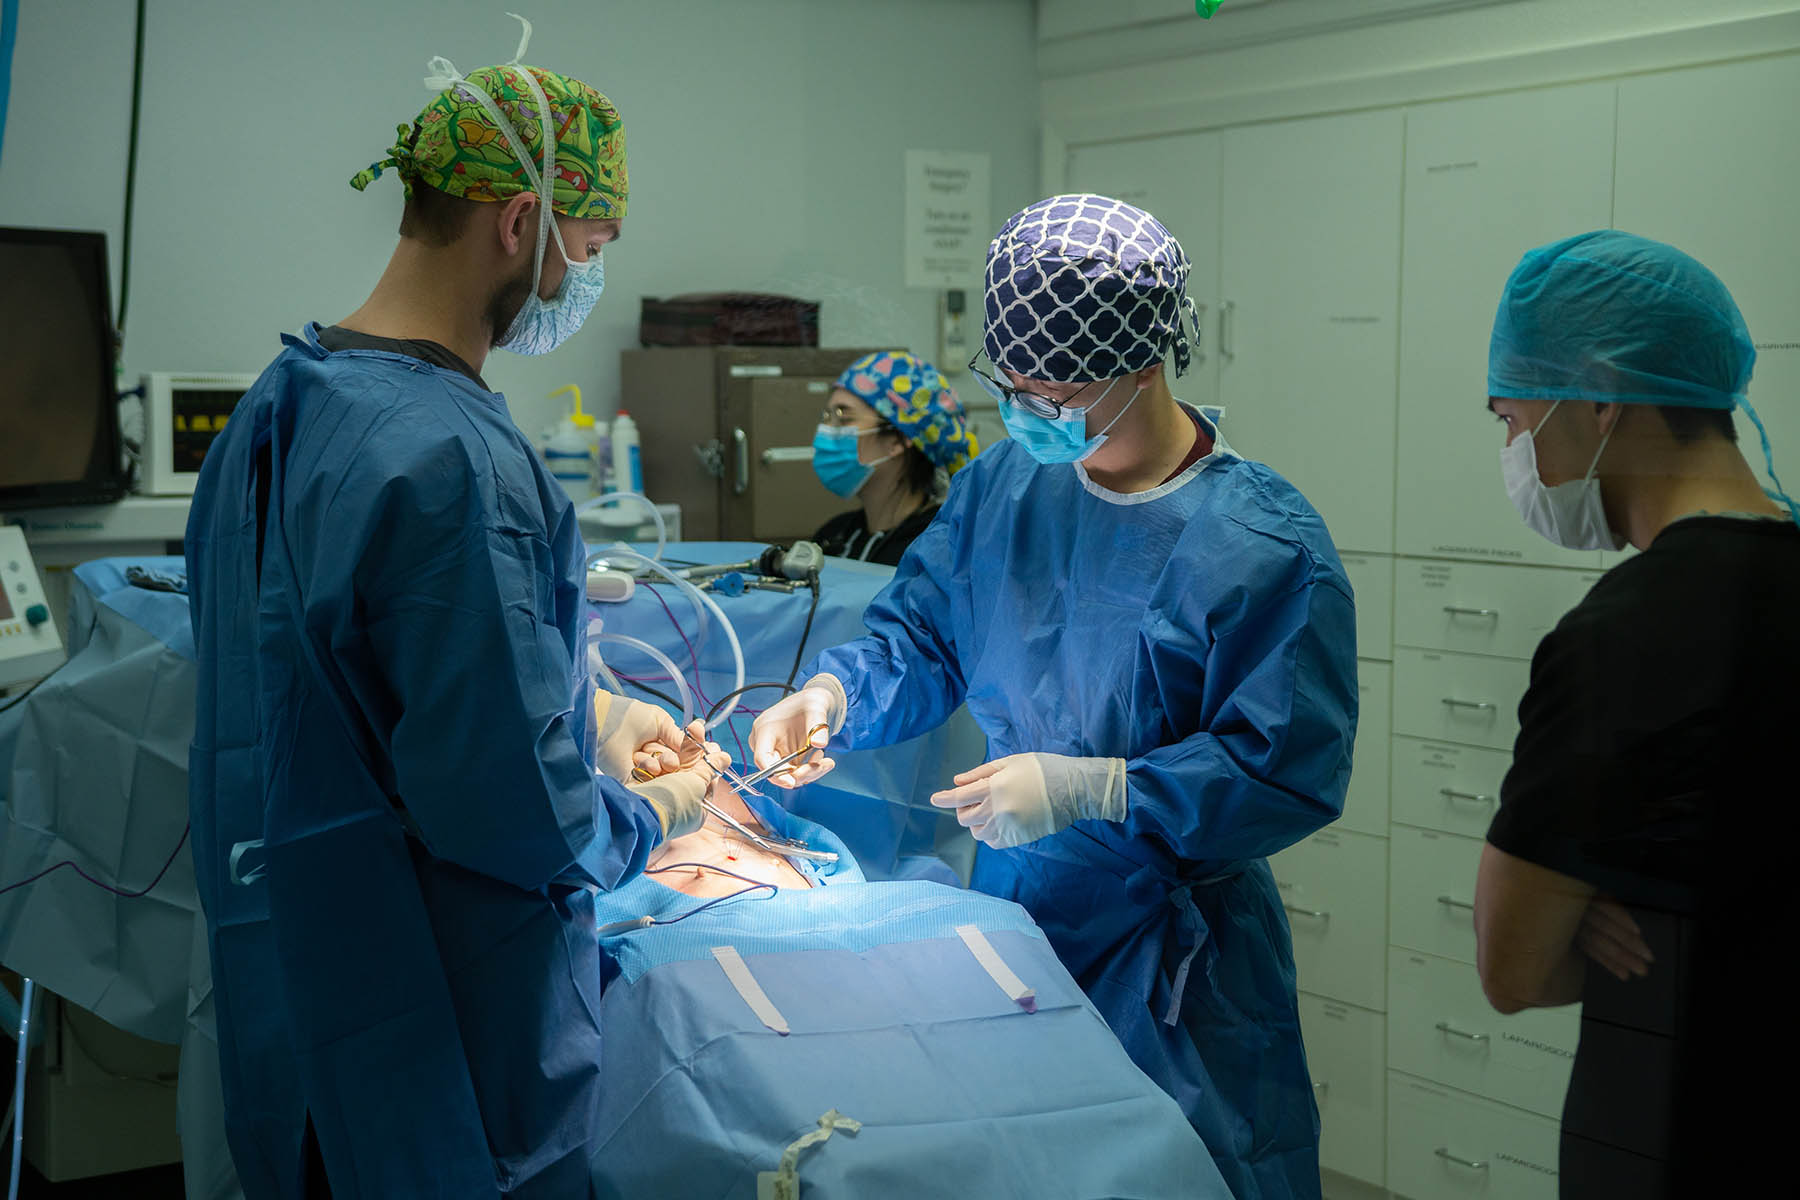 Surgery team performing a procedure on an animal under anesthetic